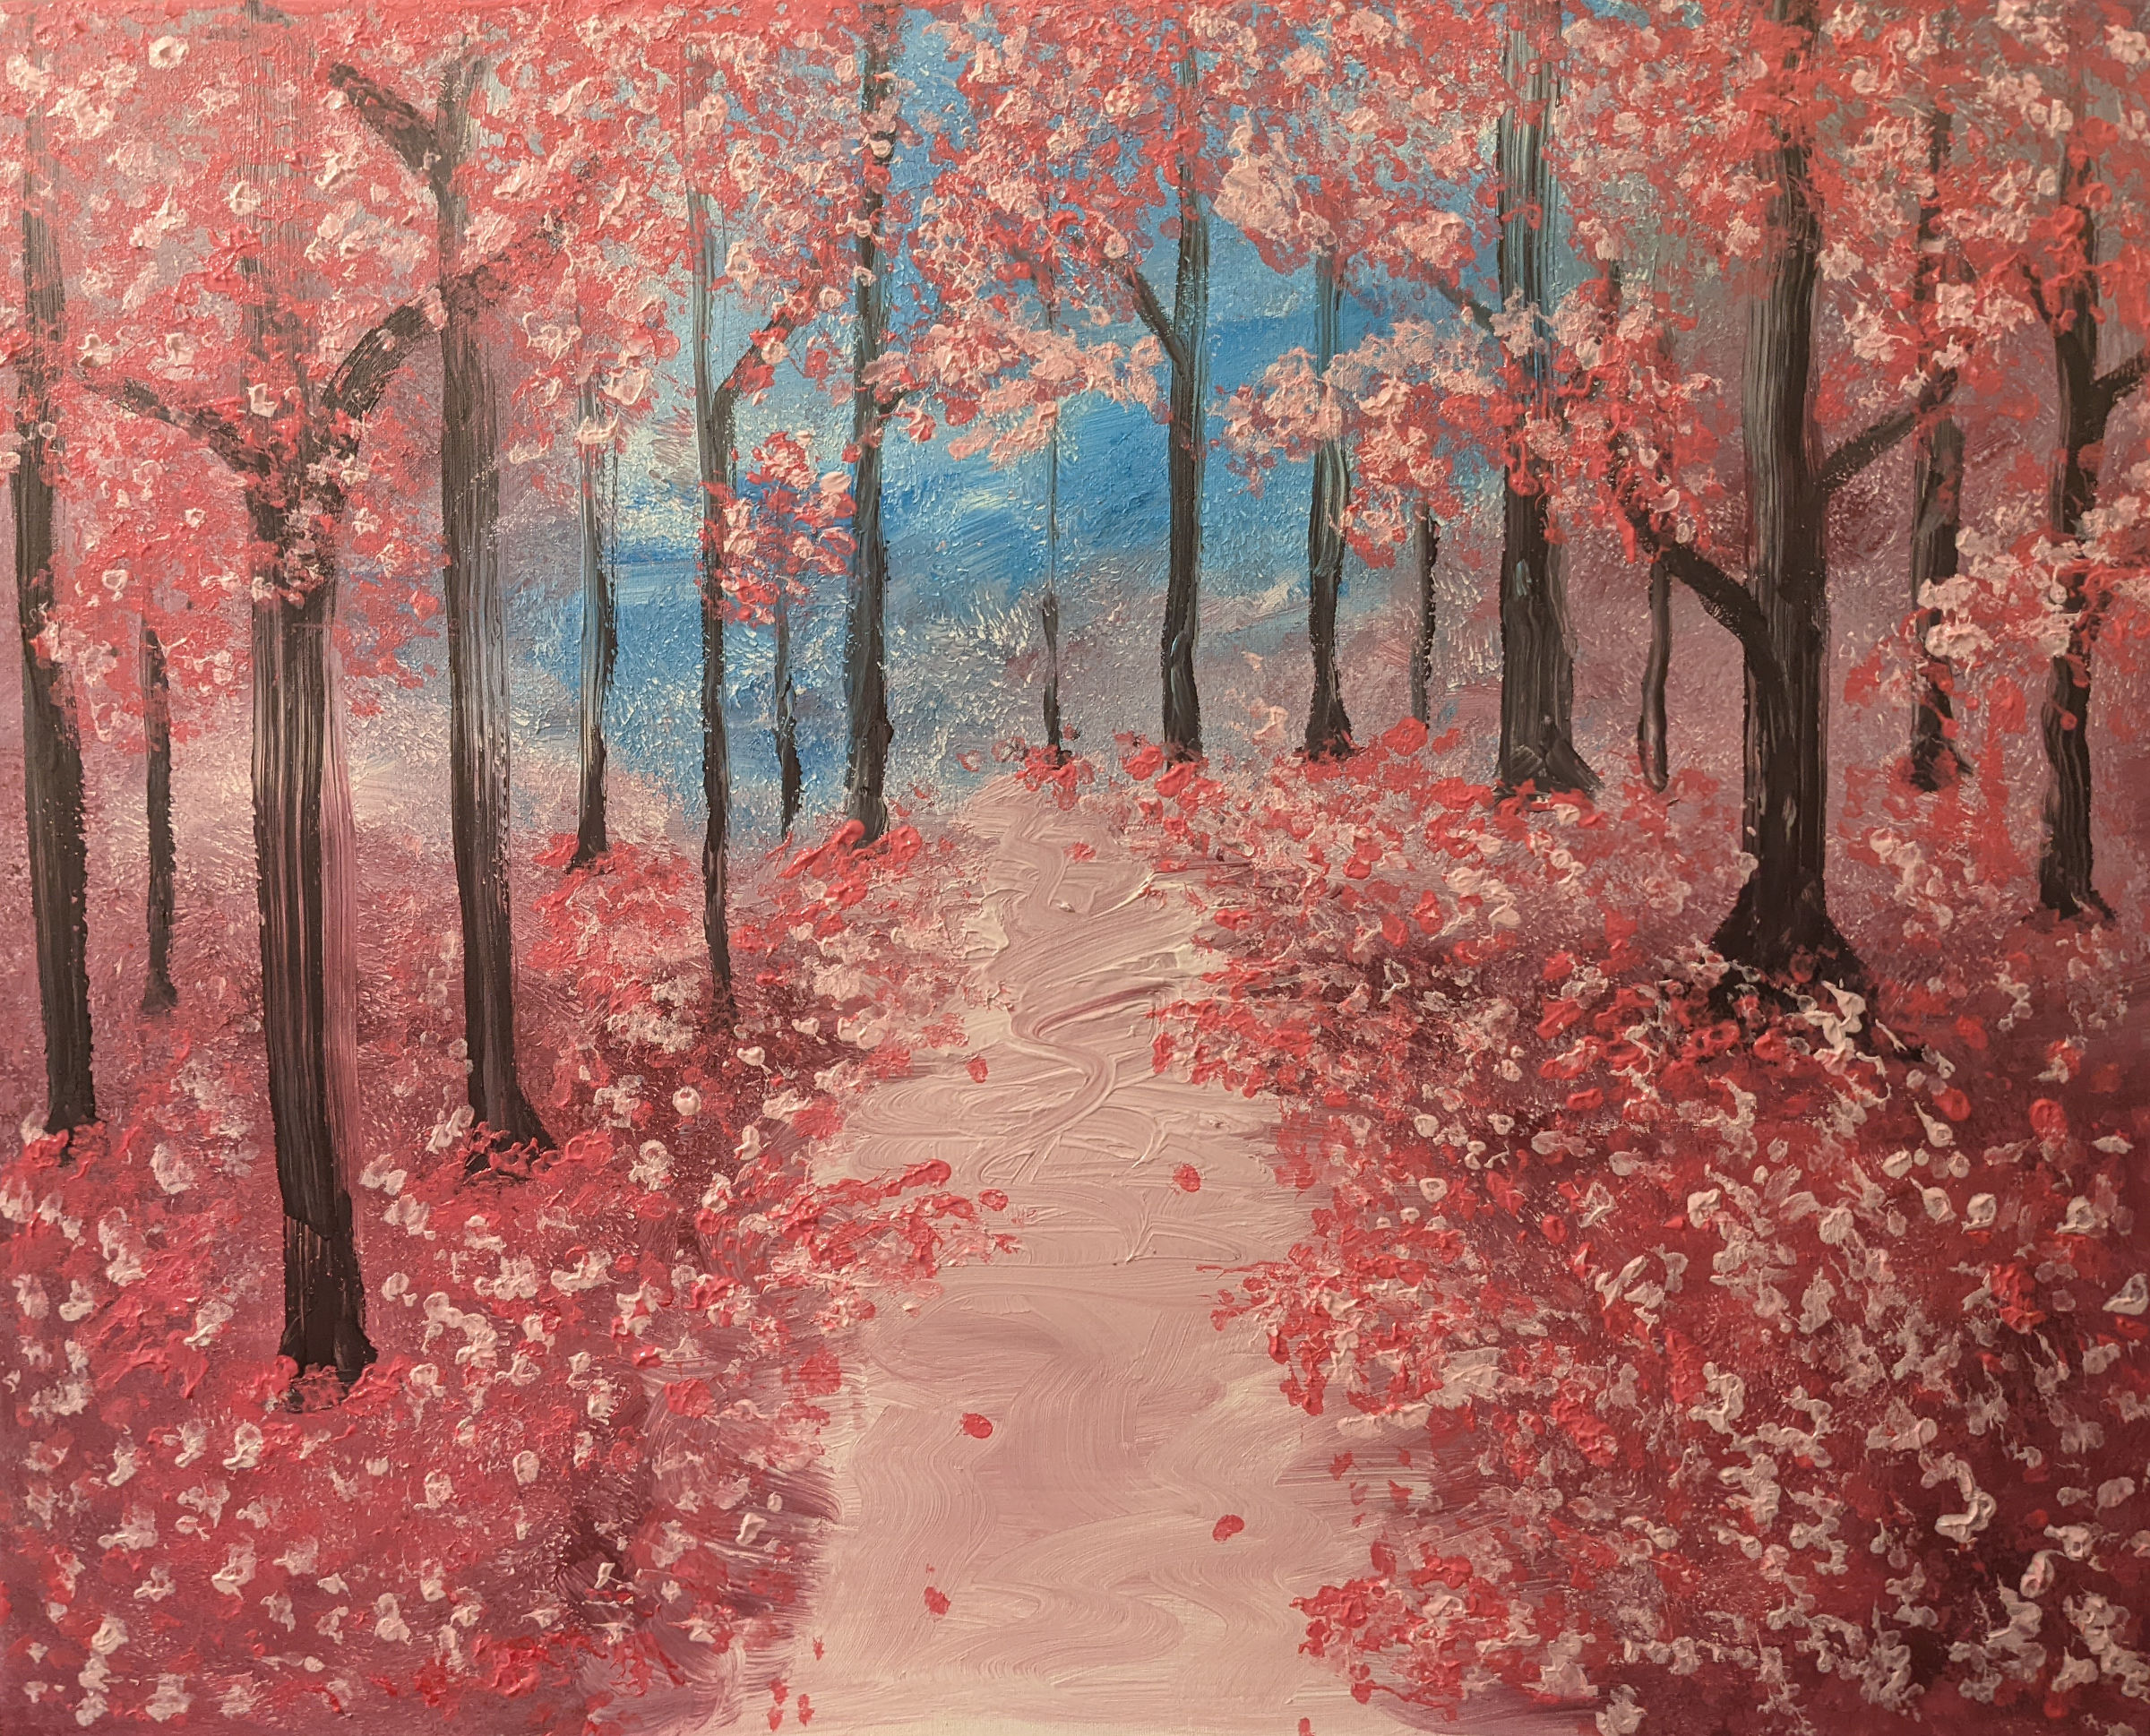 A forest of trees with pink and white blooms. Their petals have covered the forest floor. Pathway in the center.